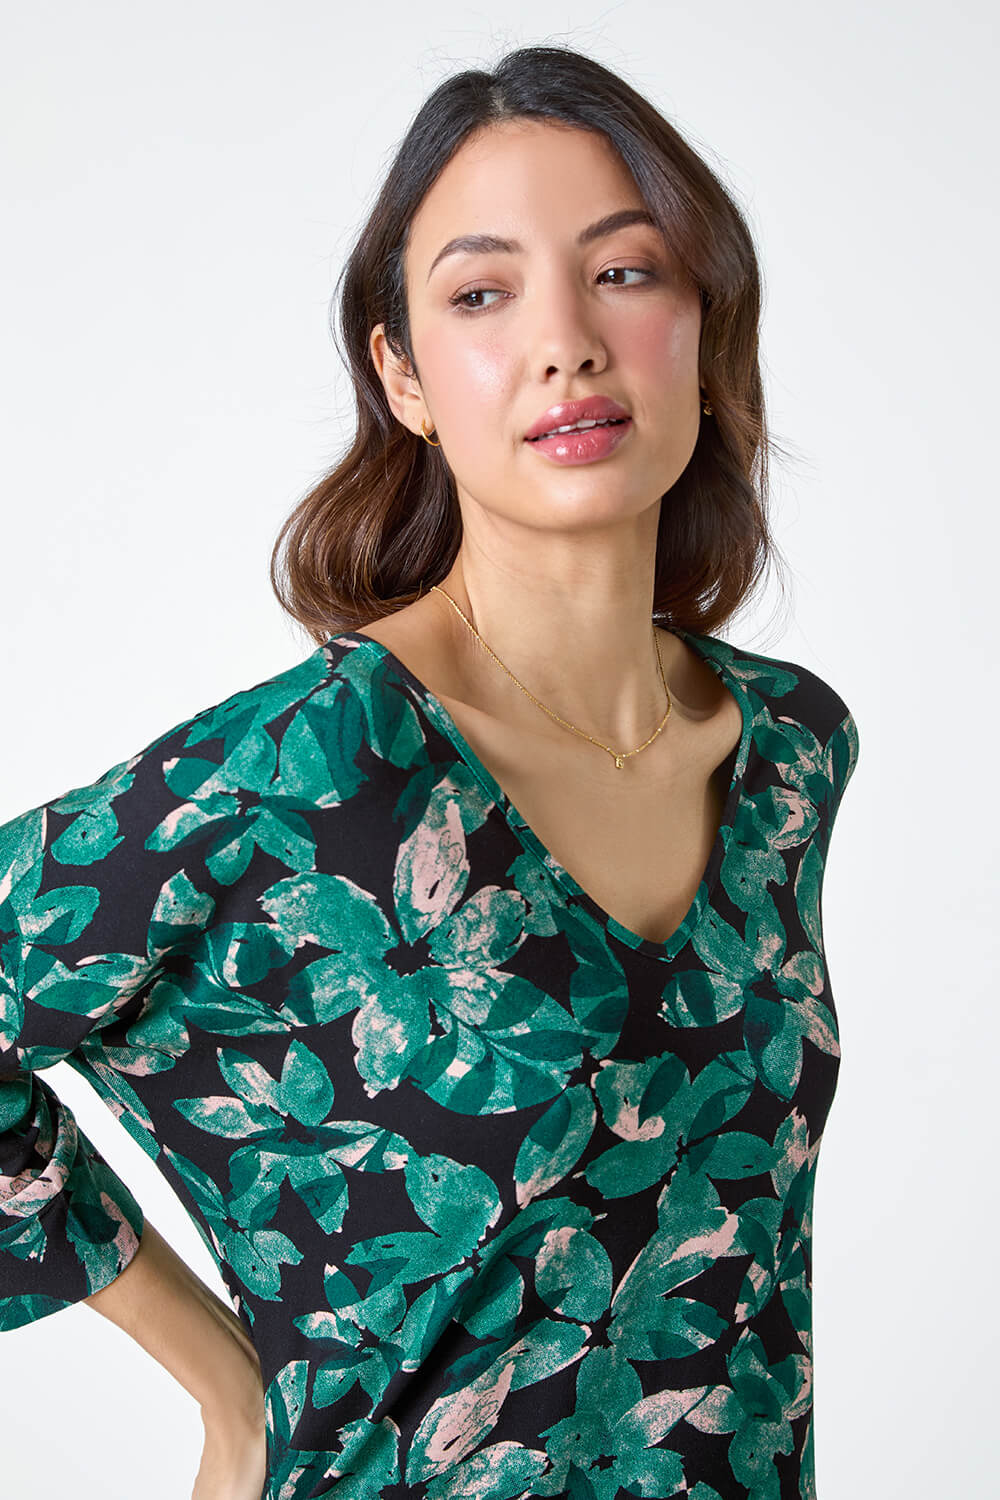 Green Floral Print Blouson Stretch Top, Image 2 of 5